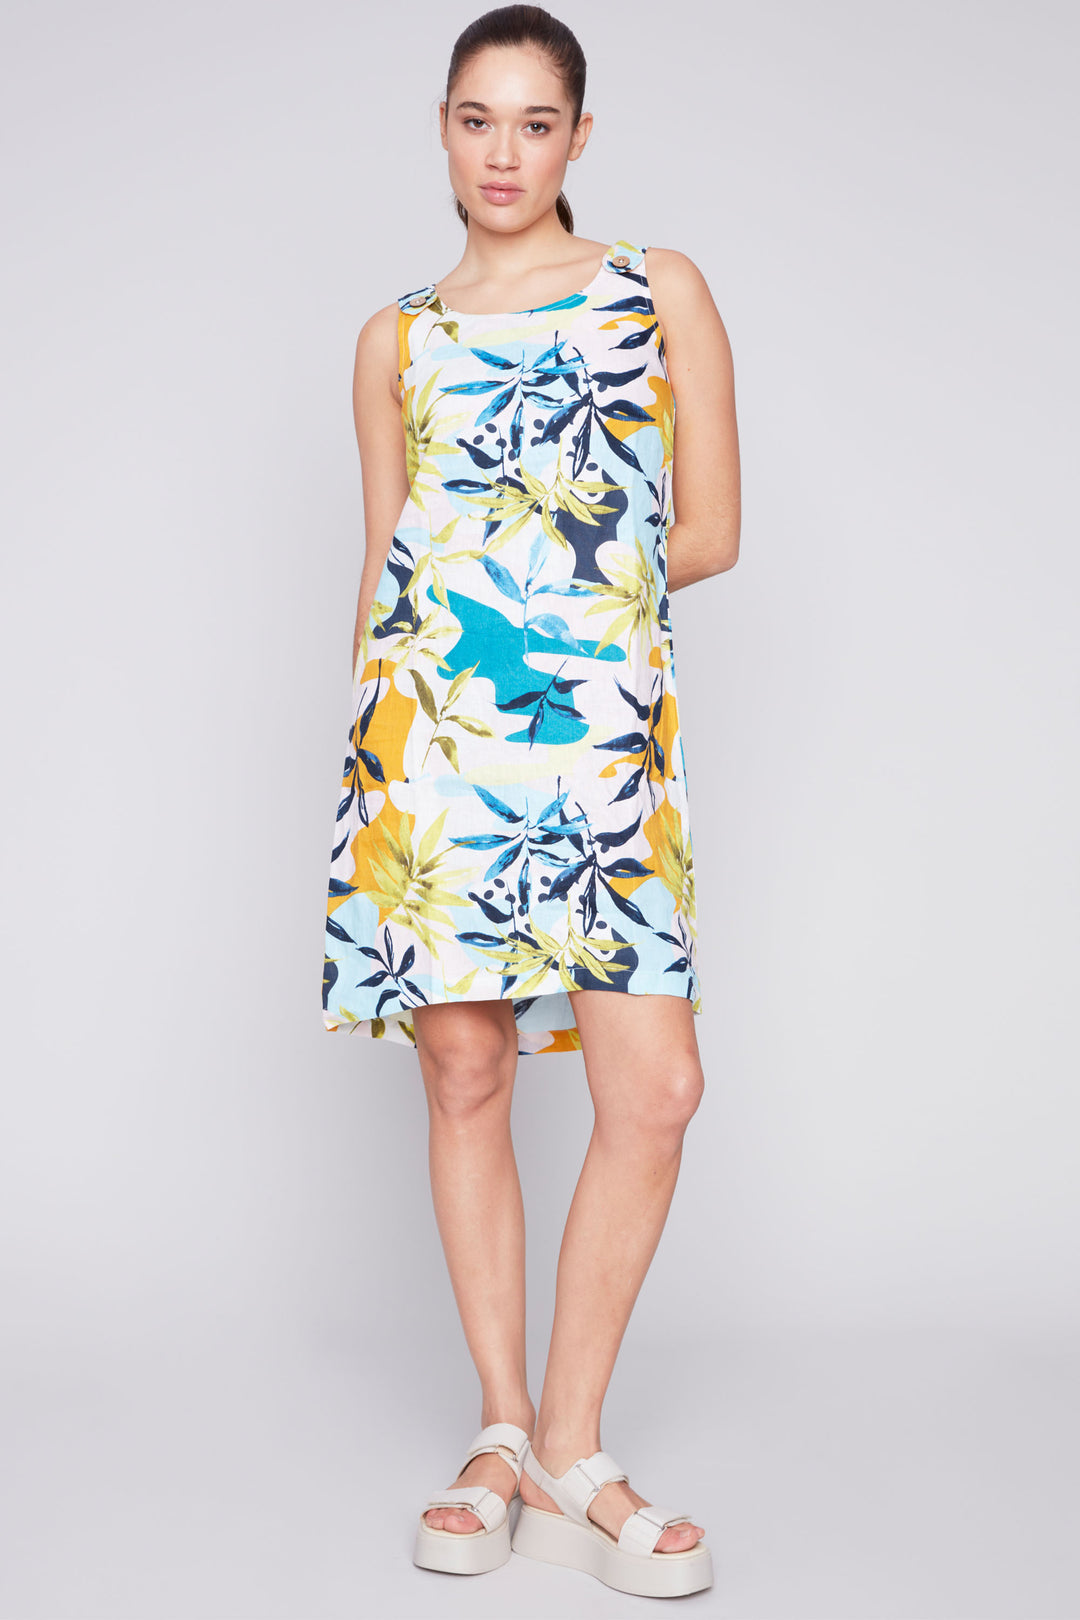 Charlie B Spring 2024 Featuring a bright, vibrant summer print and made of all linen, this sleeveless beauty is perfect for any sunny destination